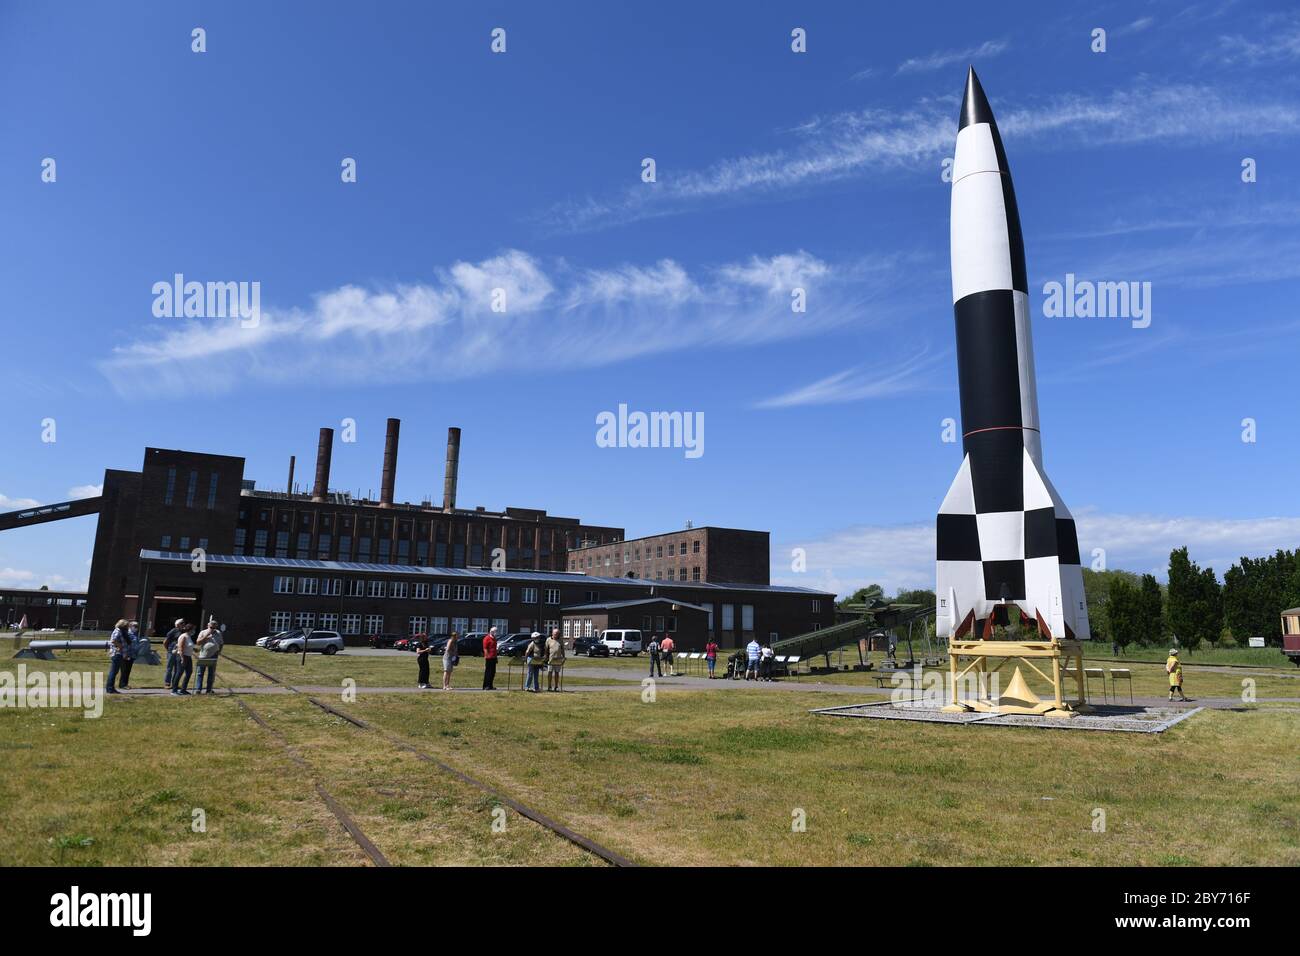 09 June 2020, Mecklenburg-Western Pomerania, Peenemünde: The replica of a  V2 rocket is located on the site of the former Peenemünde Army Research  Institute on the island of Usedom - today's Historisch-Technisches